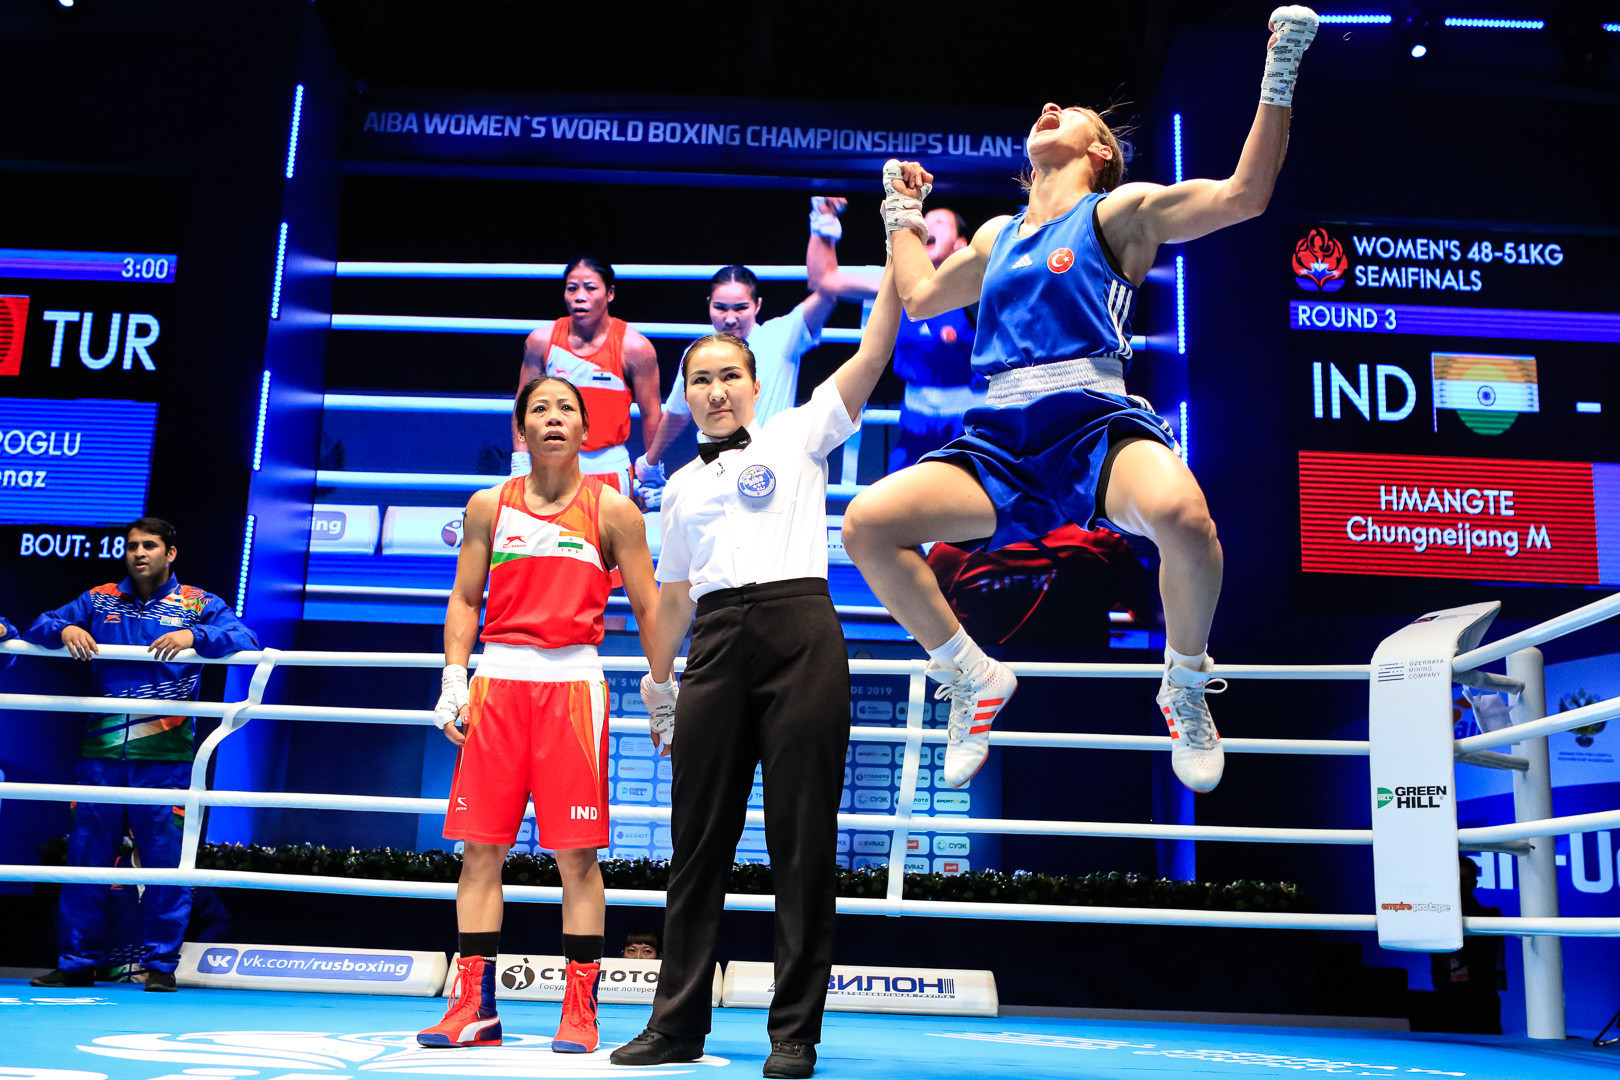 Mary Kom of India was in disbelief after it was decided she lost 4-1 to Buse Çakıroğlu of Turkey at the Women's World Boxing Championships ©Russian Boxing Federation